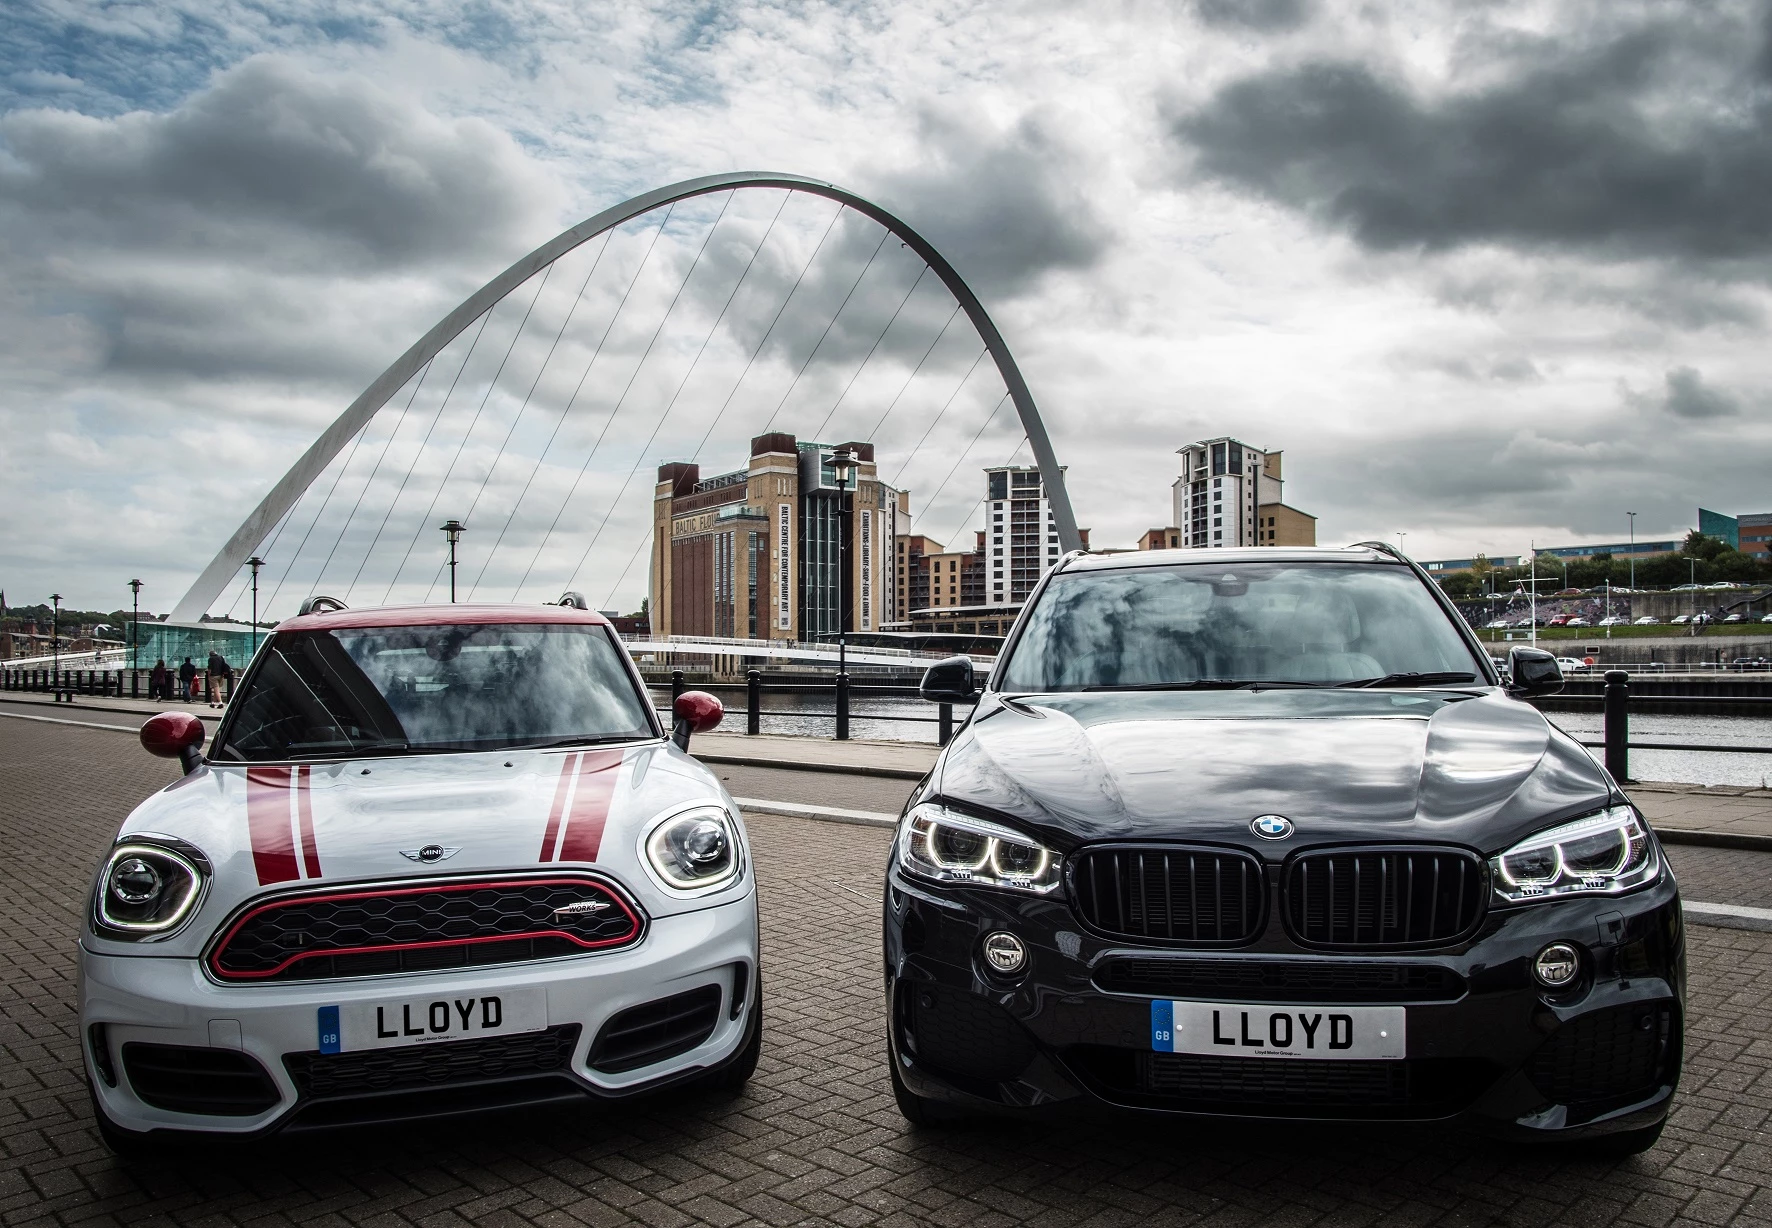 Lloyd Newcastle is going the extra mile with a weekend of fantastic BMW and MINI offers 